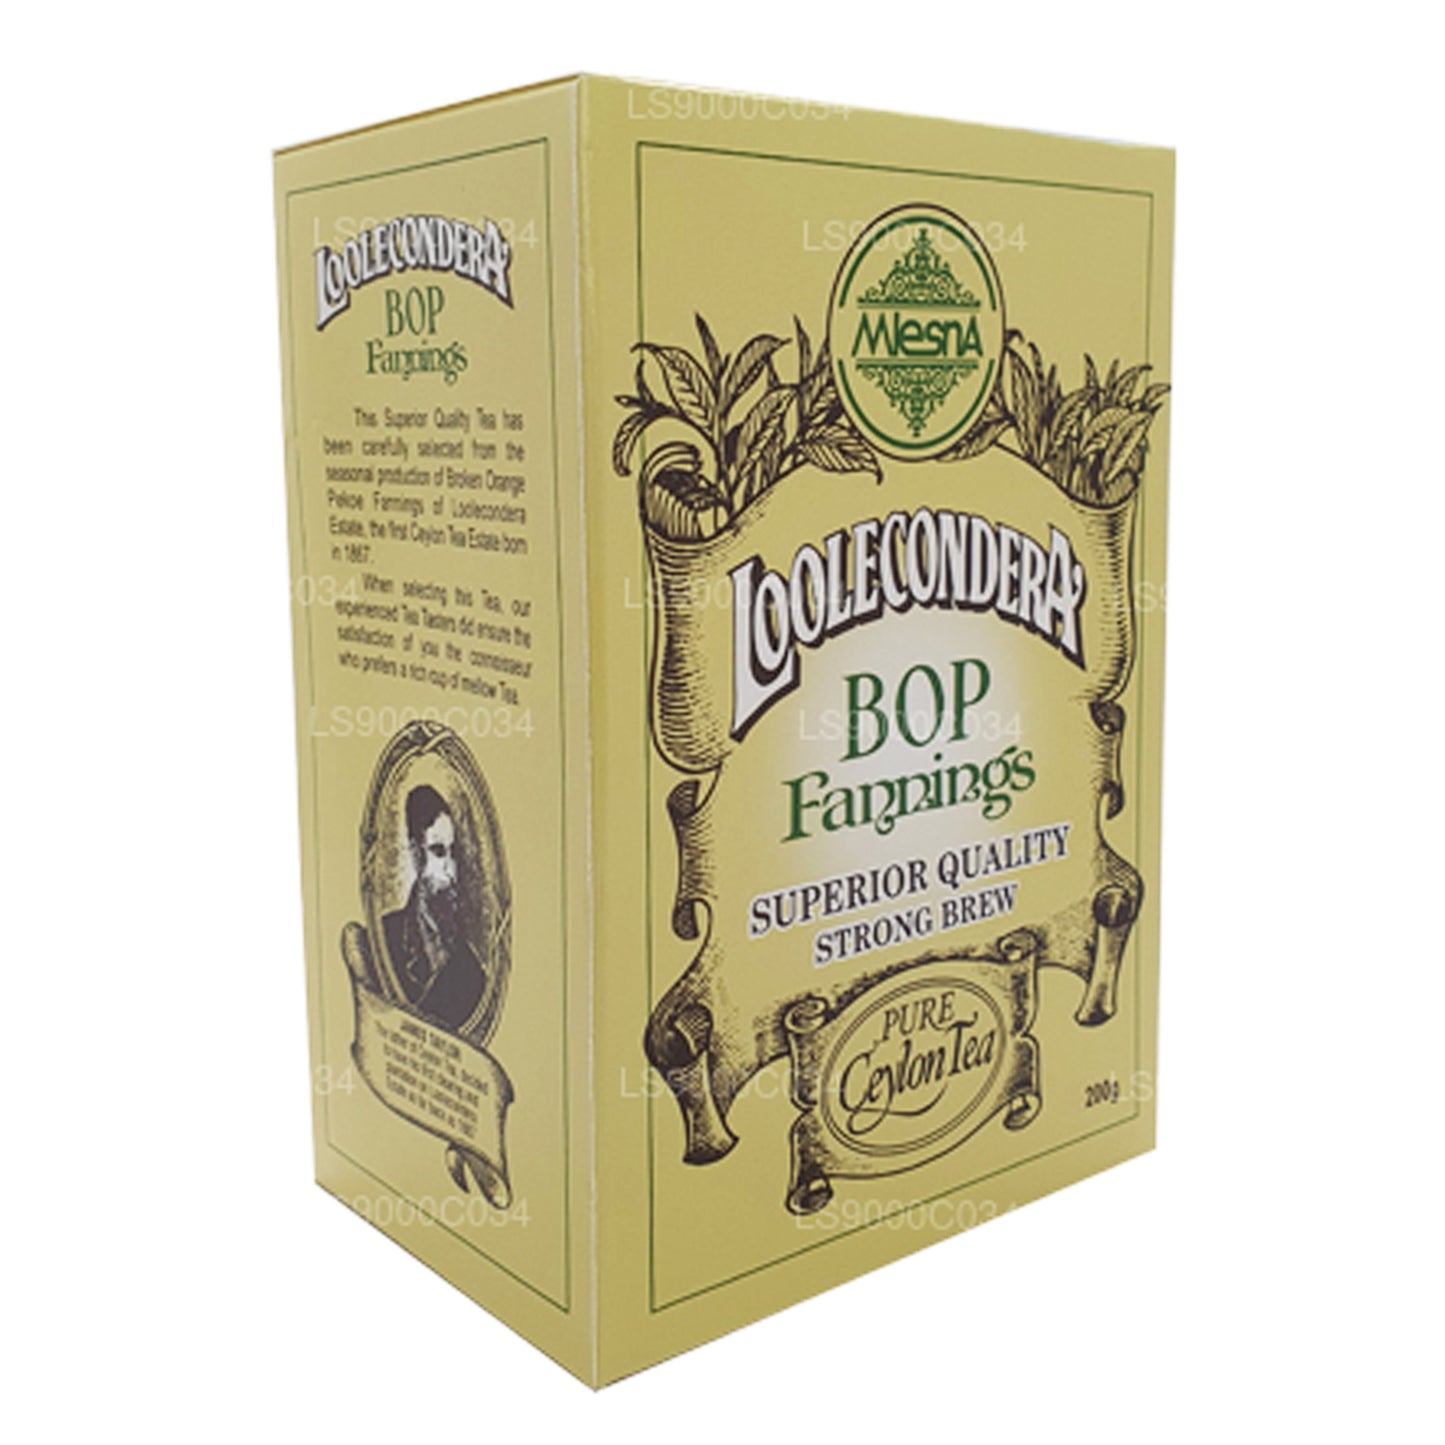 Mlesna Loolecondera BOP Fannings Strong Brew losse thee (200 g)